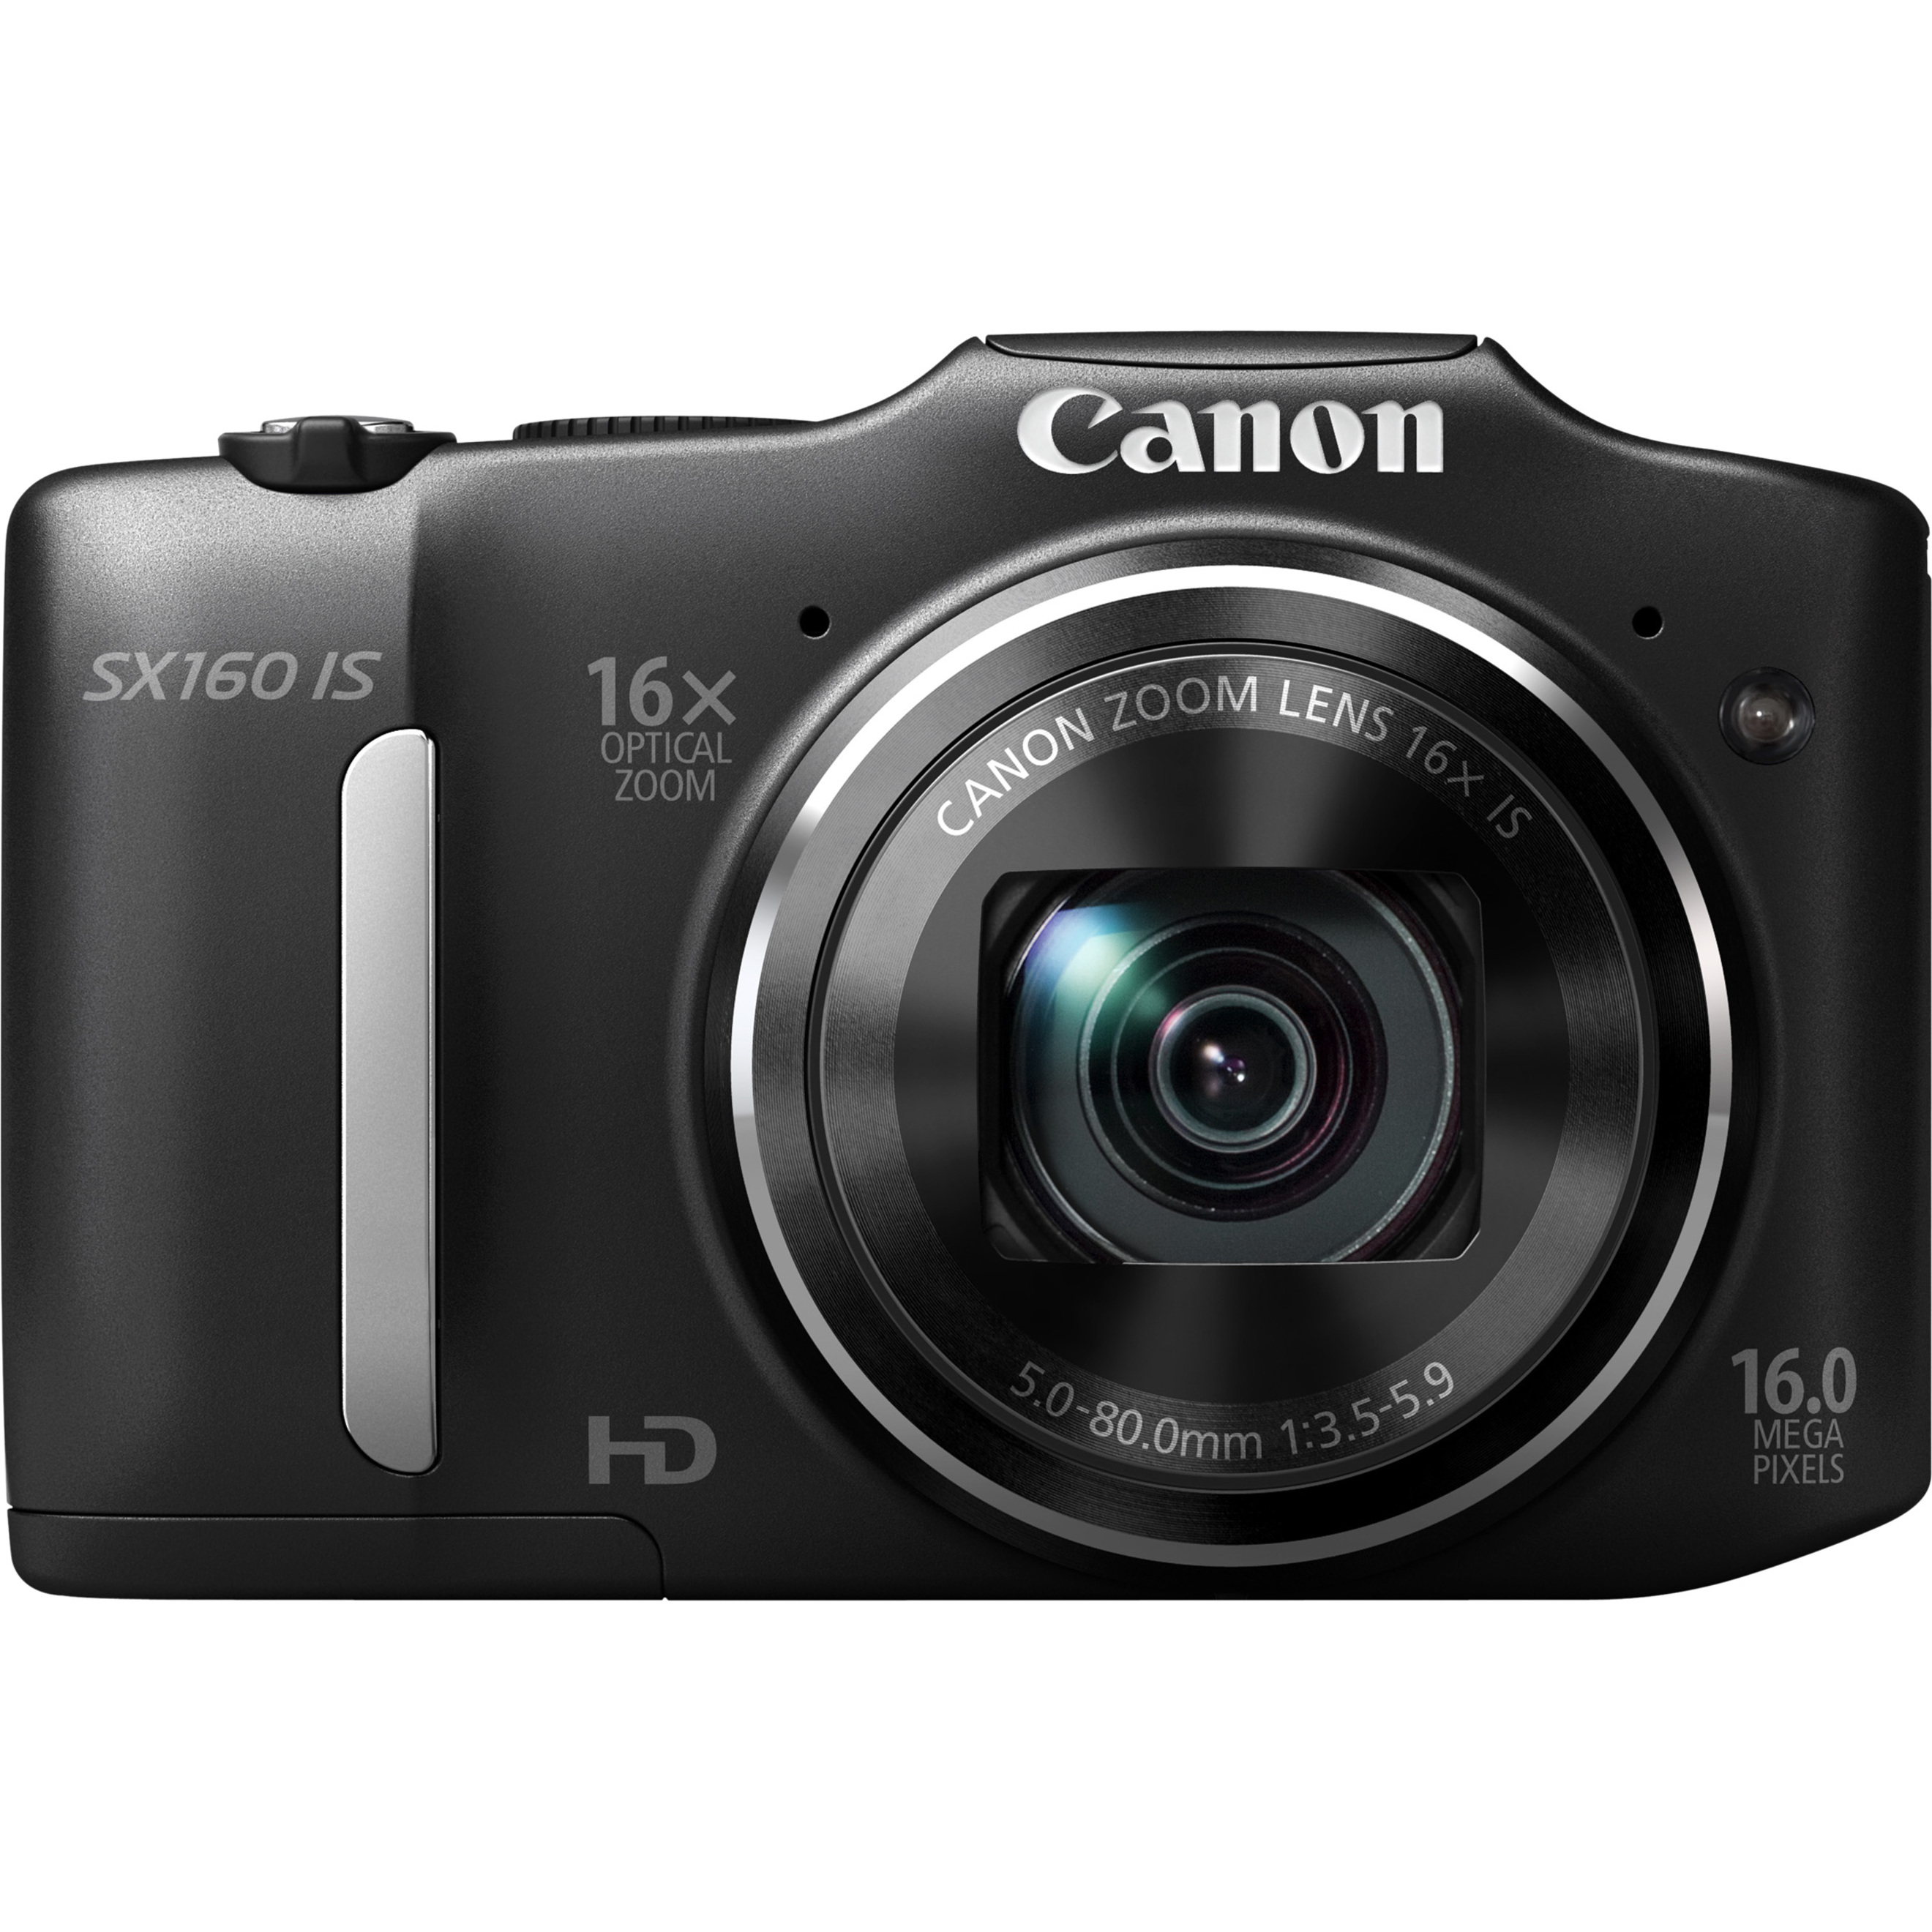 Canon PowerShot SX160 IS 16 Megapixel Compact Camera, Black - image 4 of 4